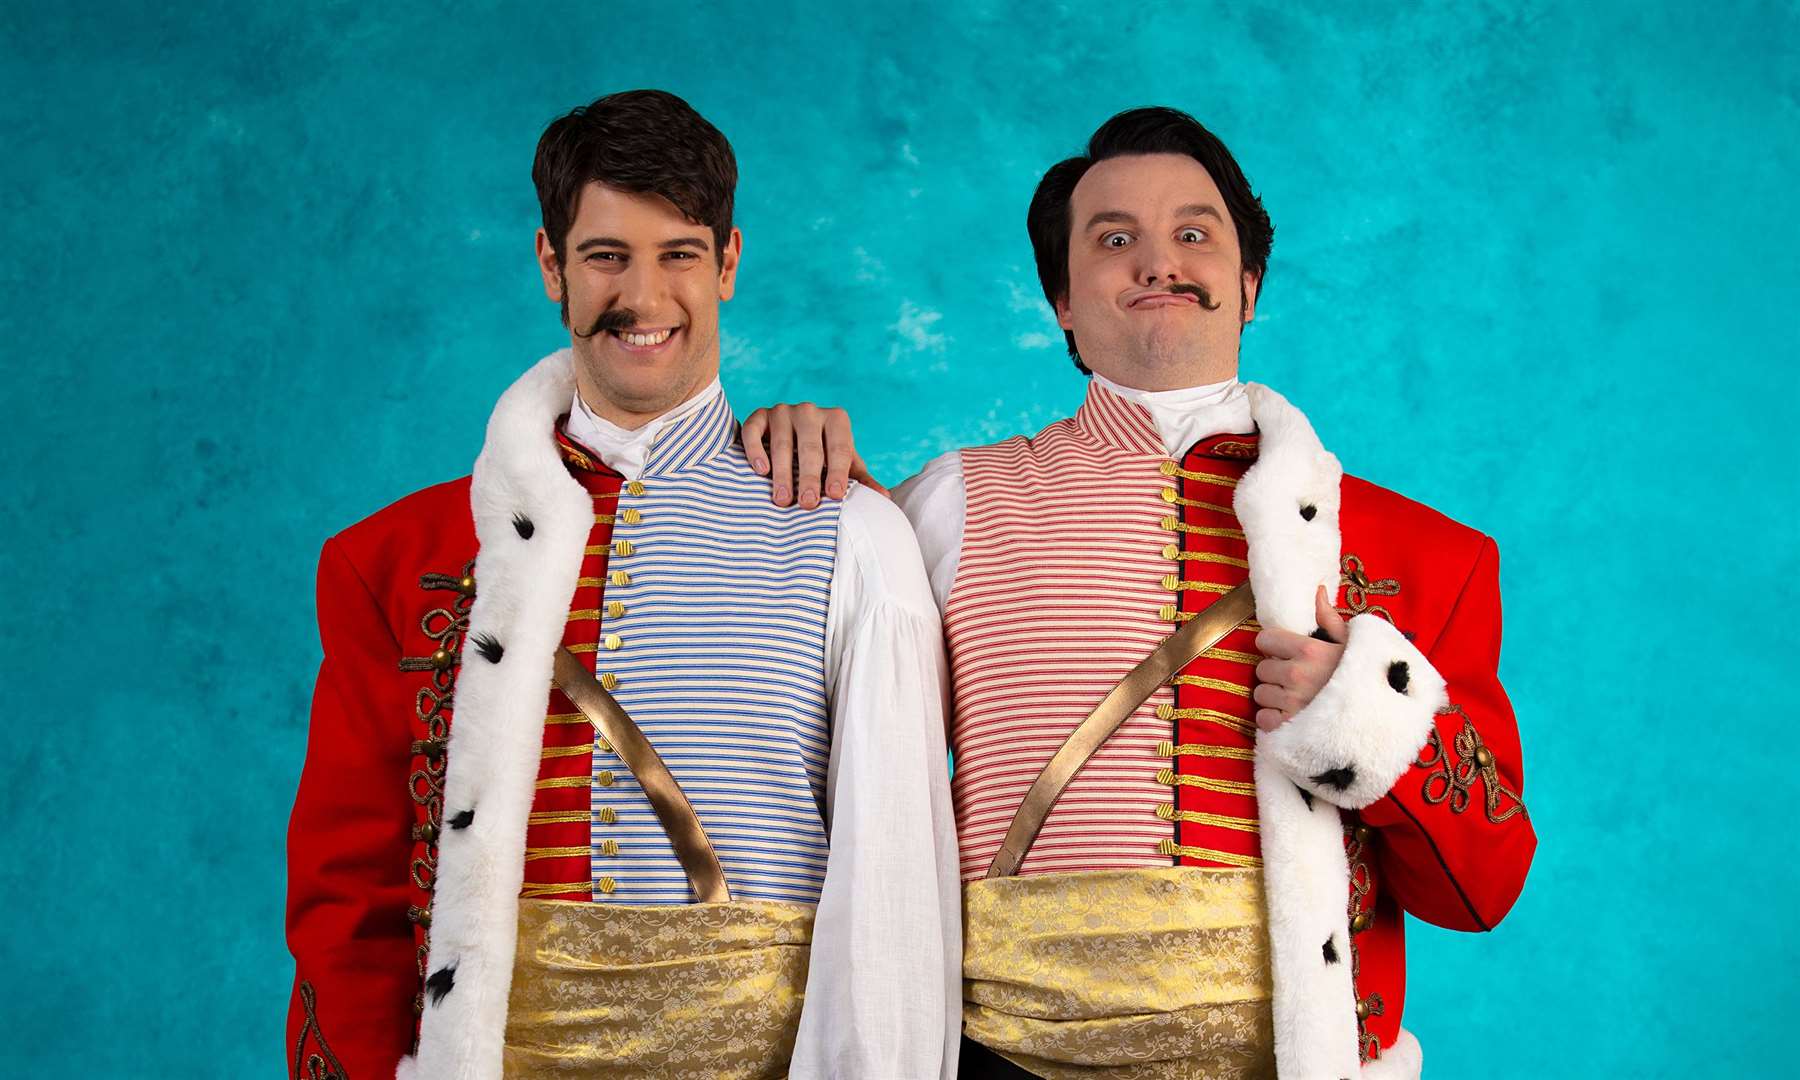 Scottish Opera's The Gondoliers comes to the theatre from Wednesday, November 10.